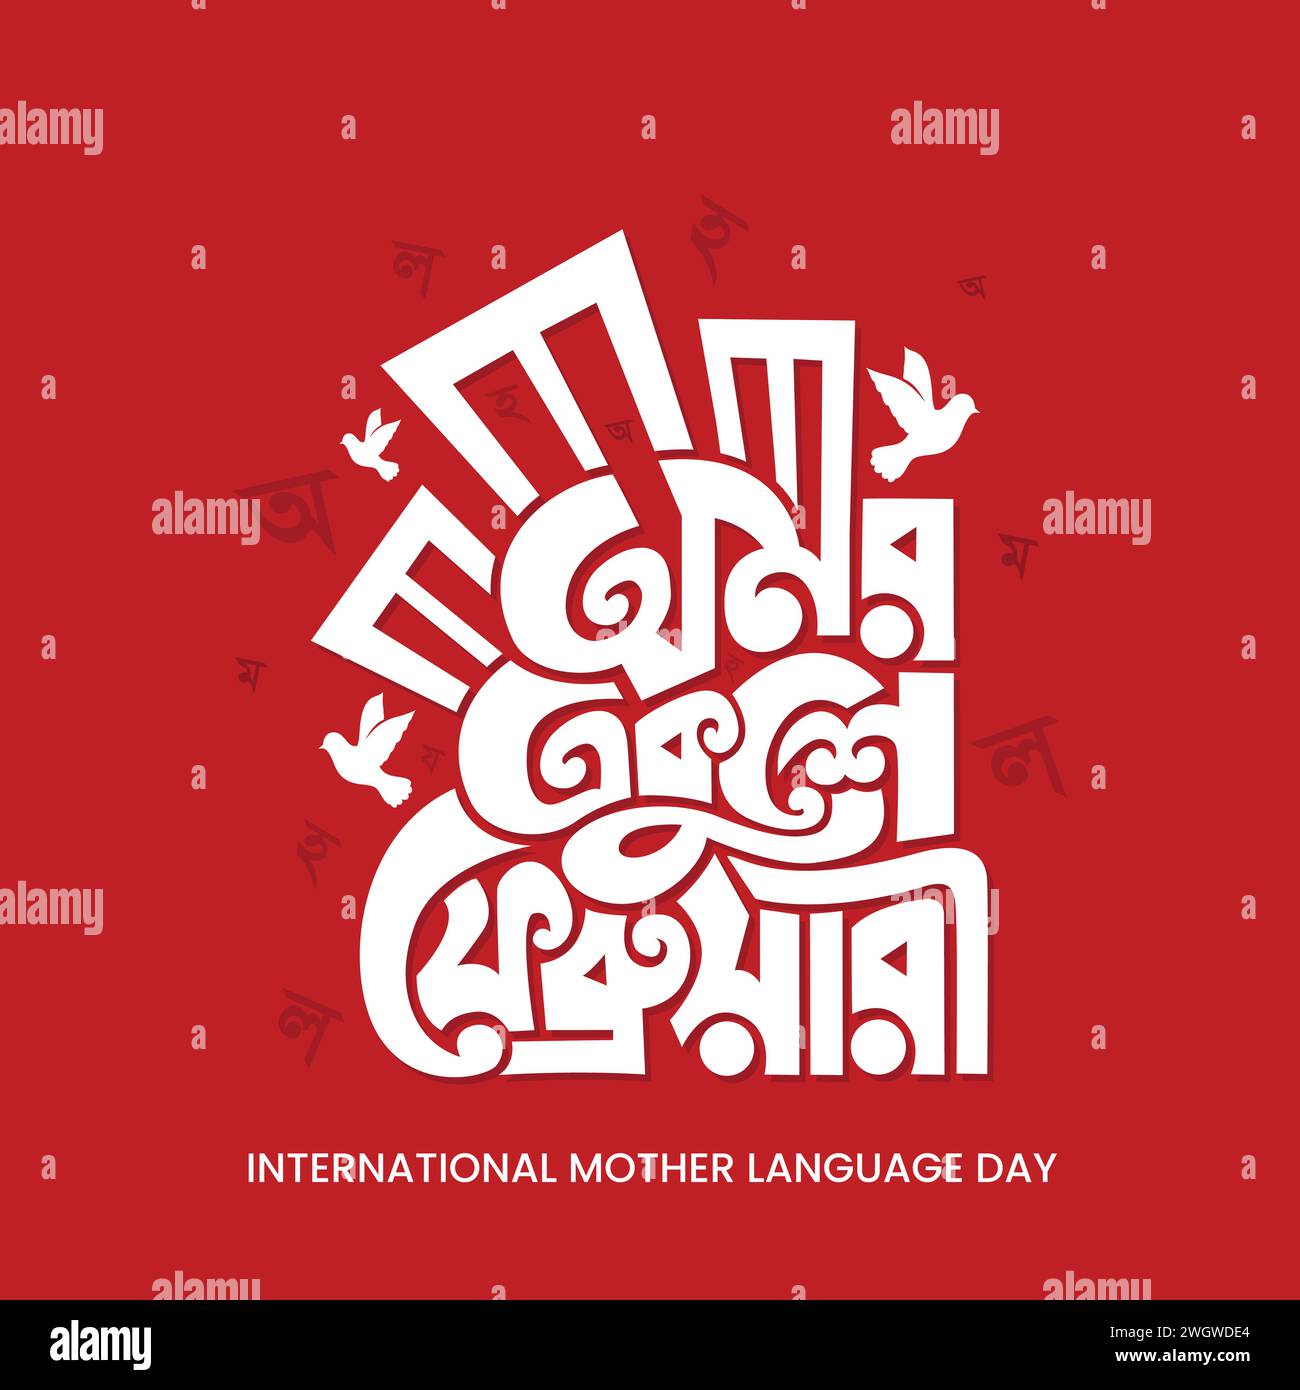 21 February International Mother Language Day Vector Illustration. Bengali holiday festival for martyrs. 21 February Bangla Typography and Calligraphy Stock Vector